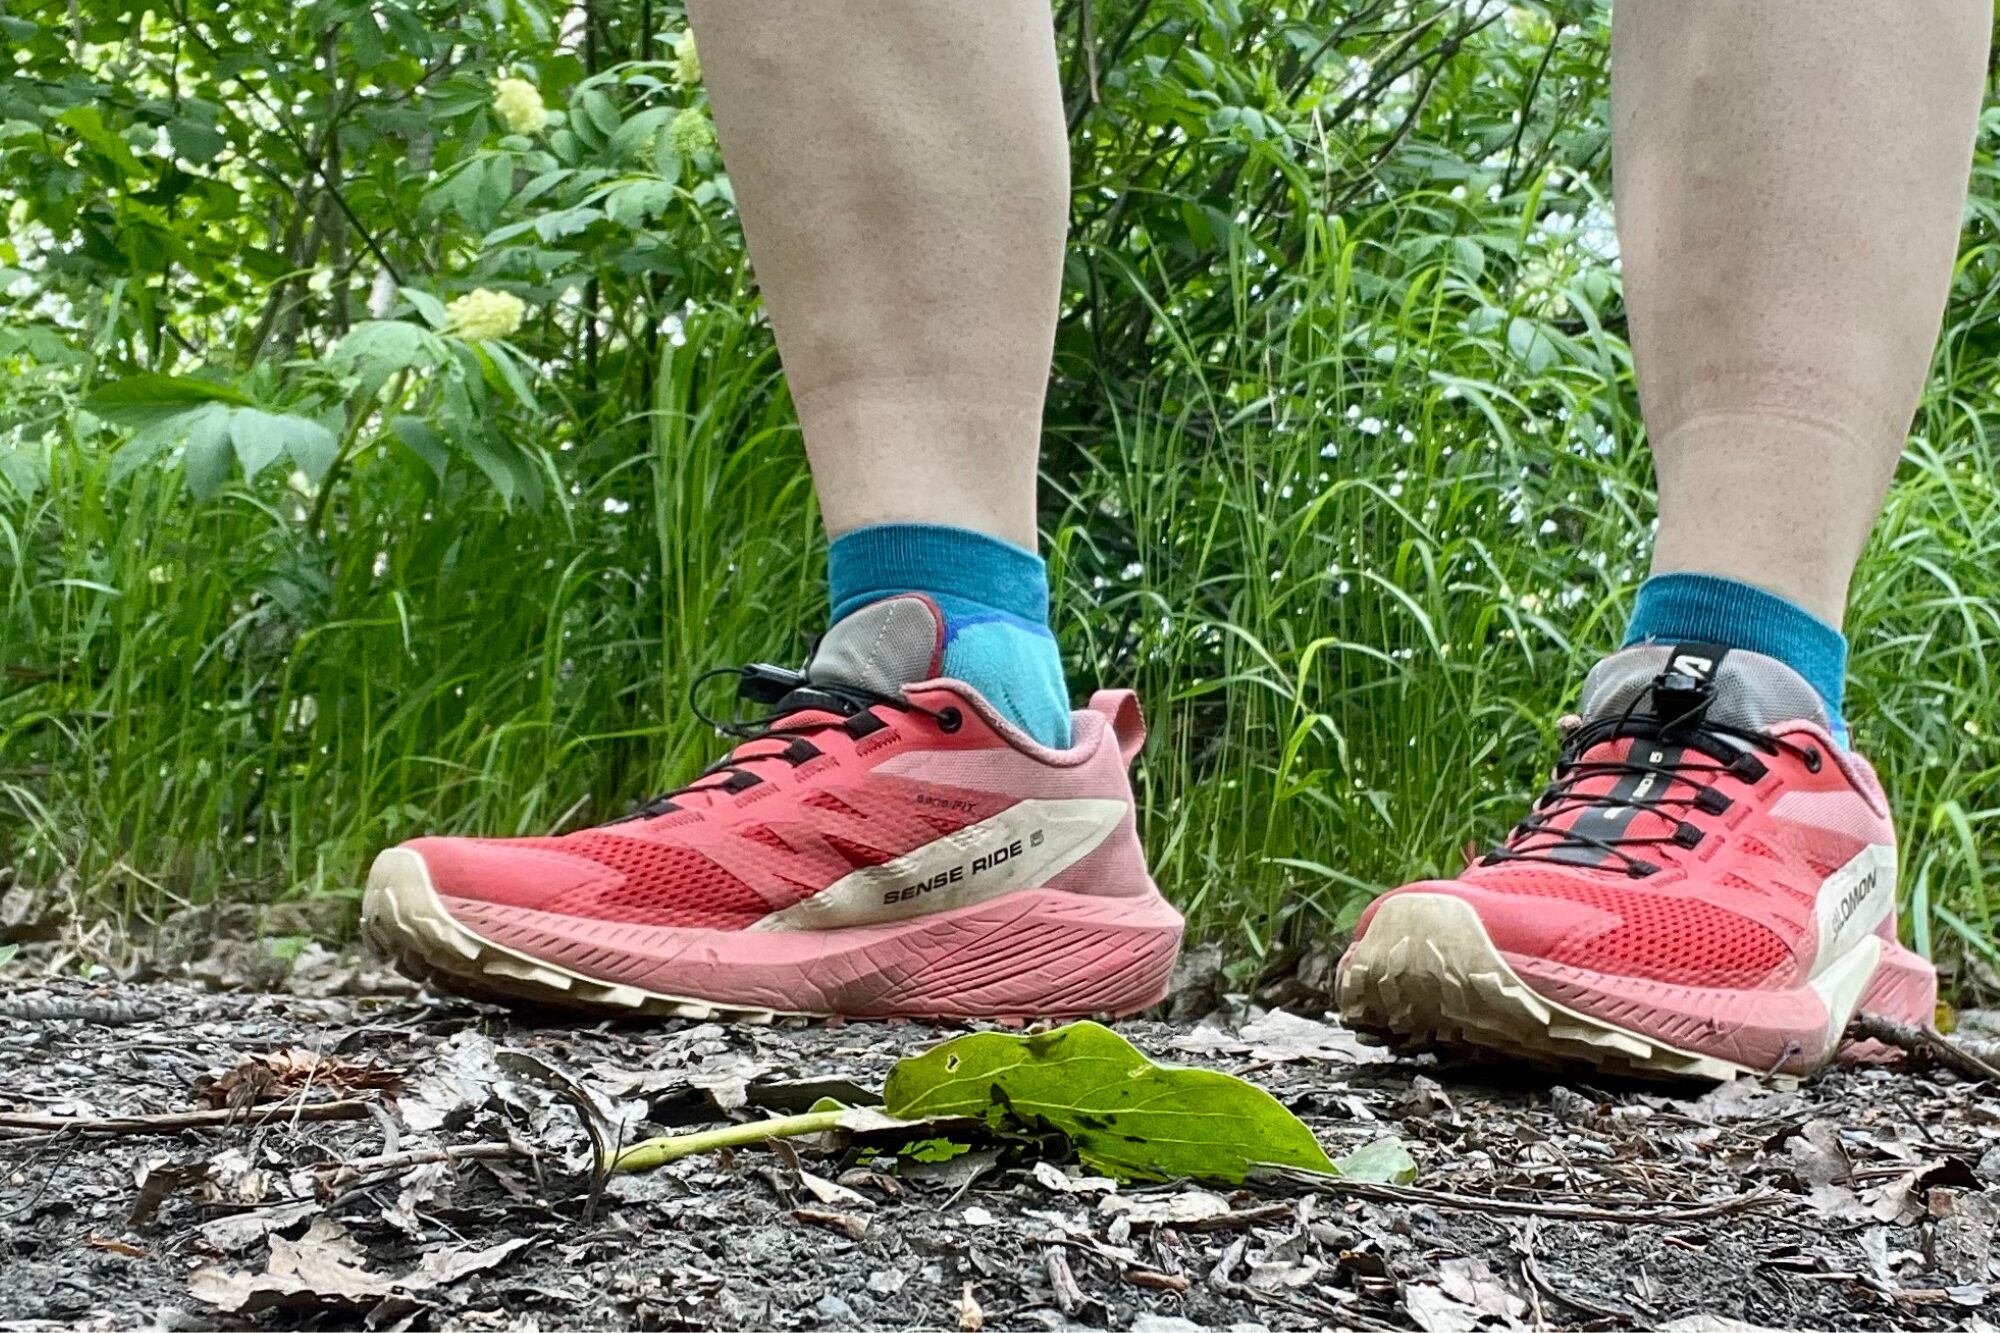 A hiker wears blue ankle socks with pink Salomon running shoes while out on the trail. 